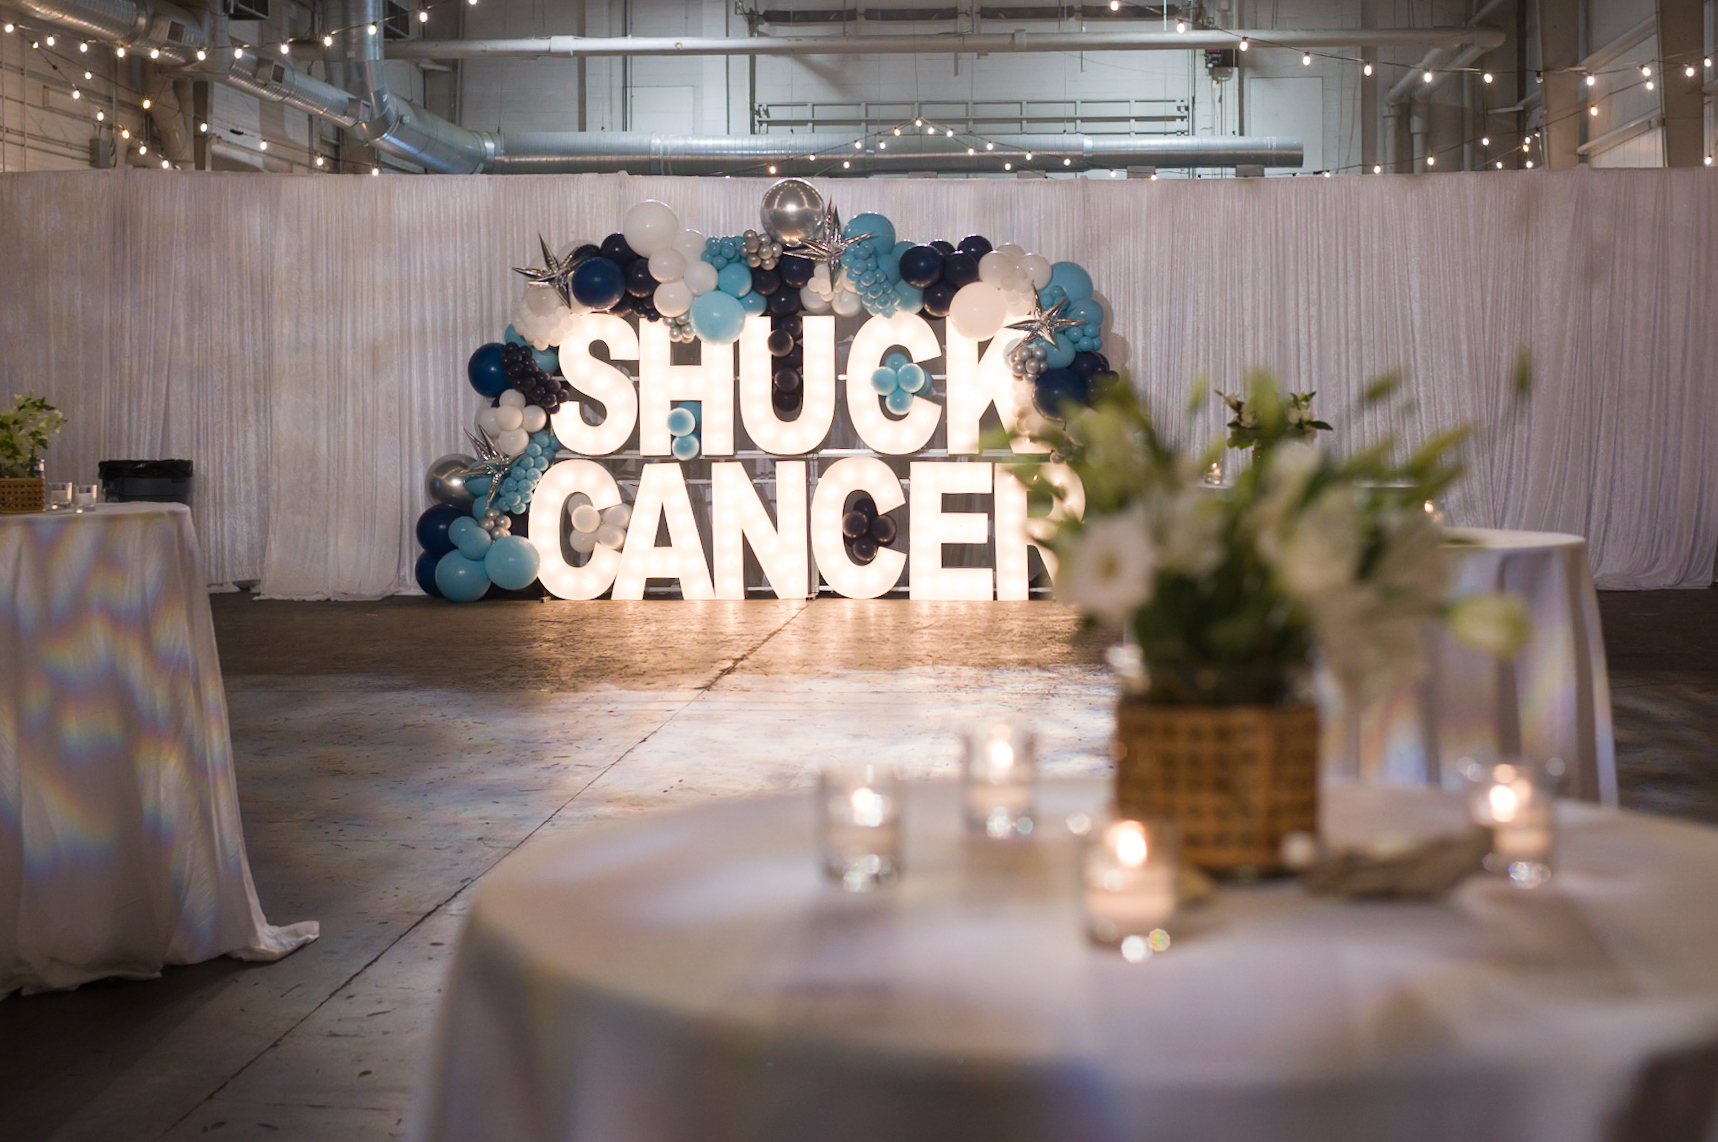 Shuck Cancer Sign with tables